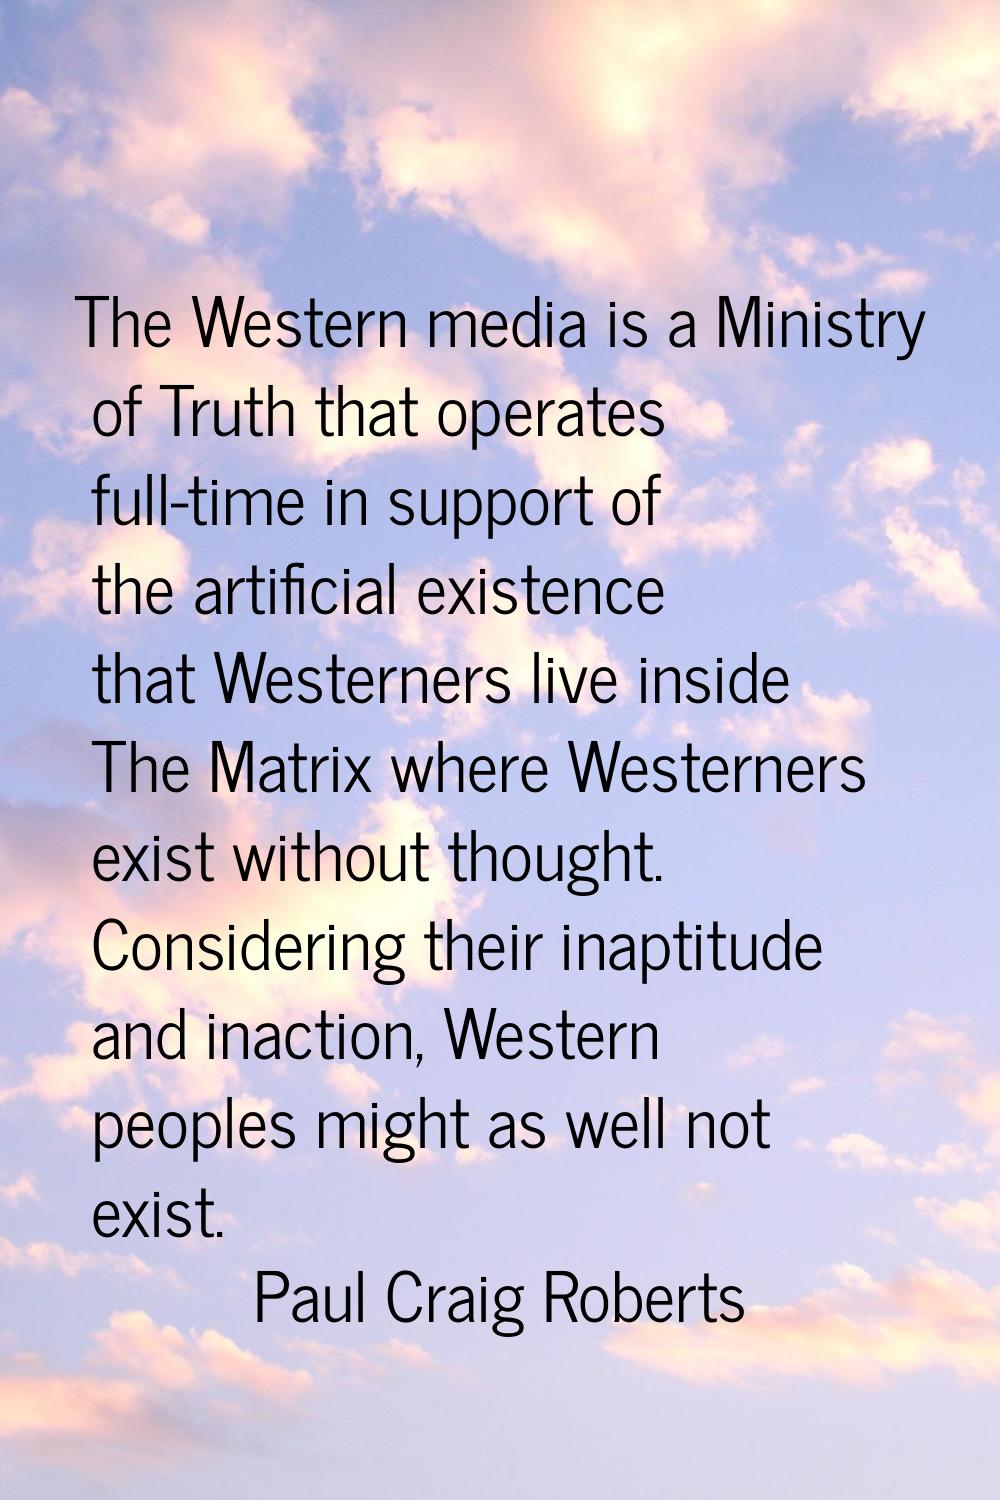 The Western media is a Ministry of Truth that operates full-time in support of the artificial exist